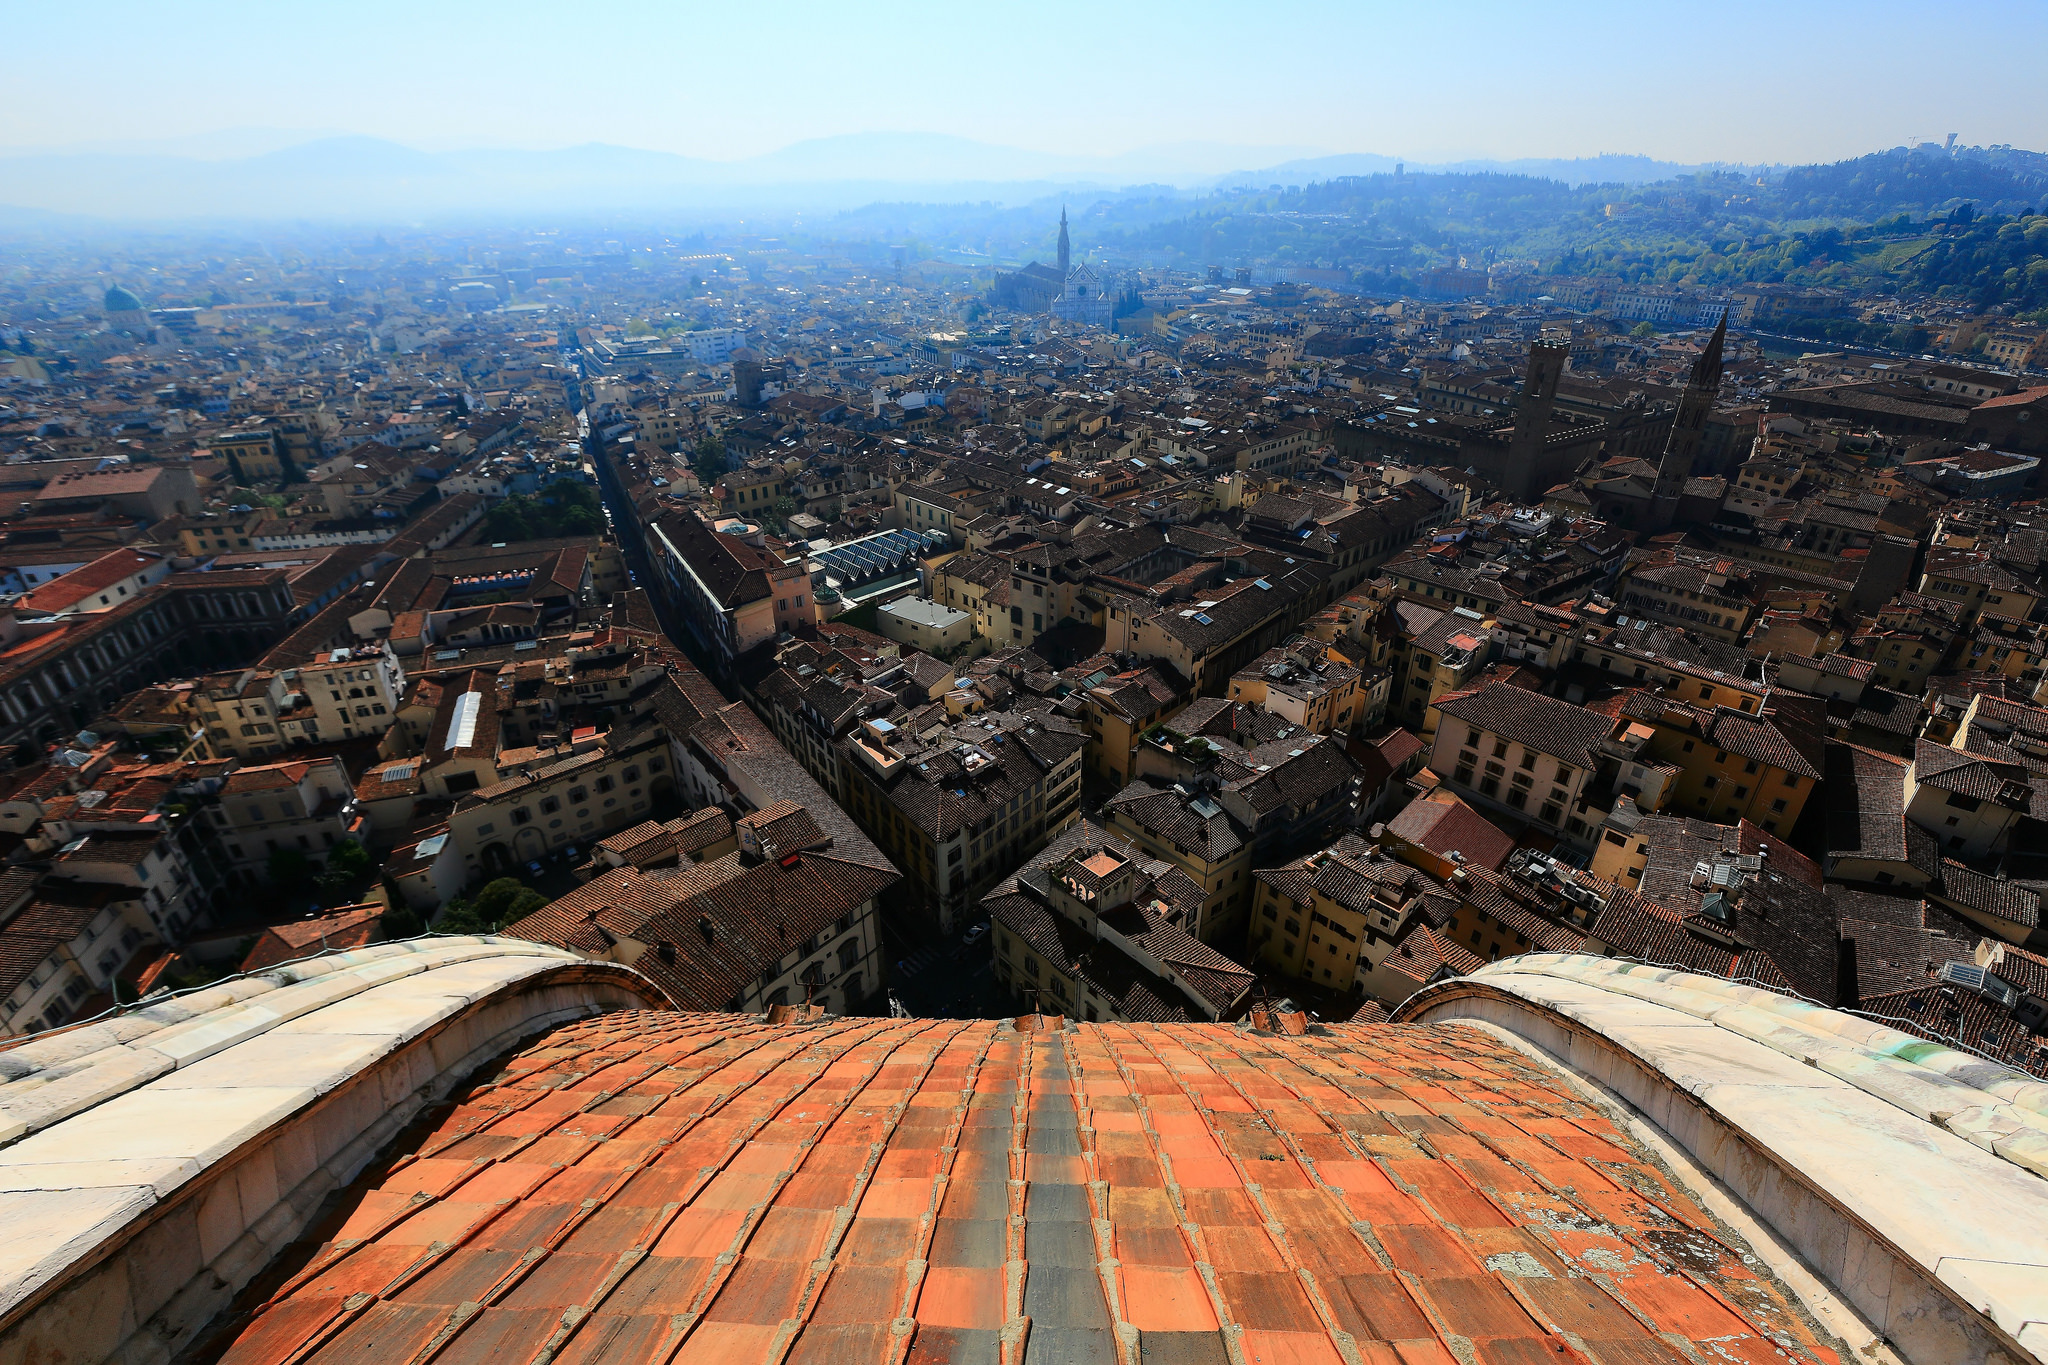 man made, florence, building, city, cityscape, house, italy, cities